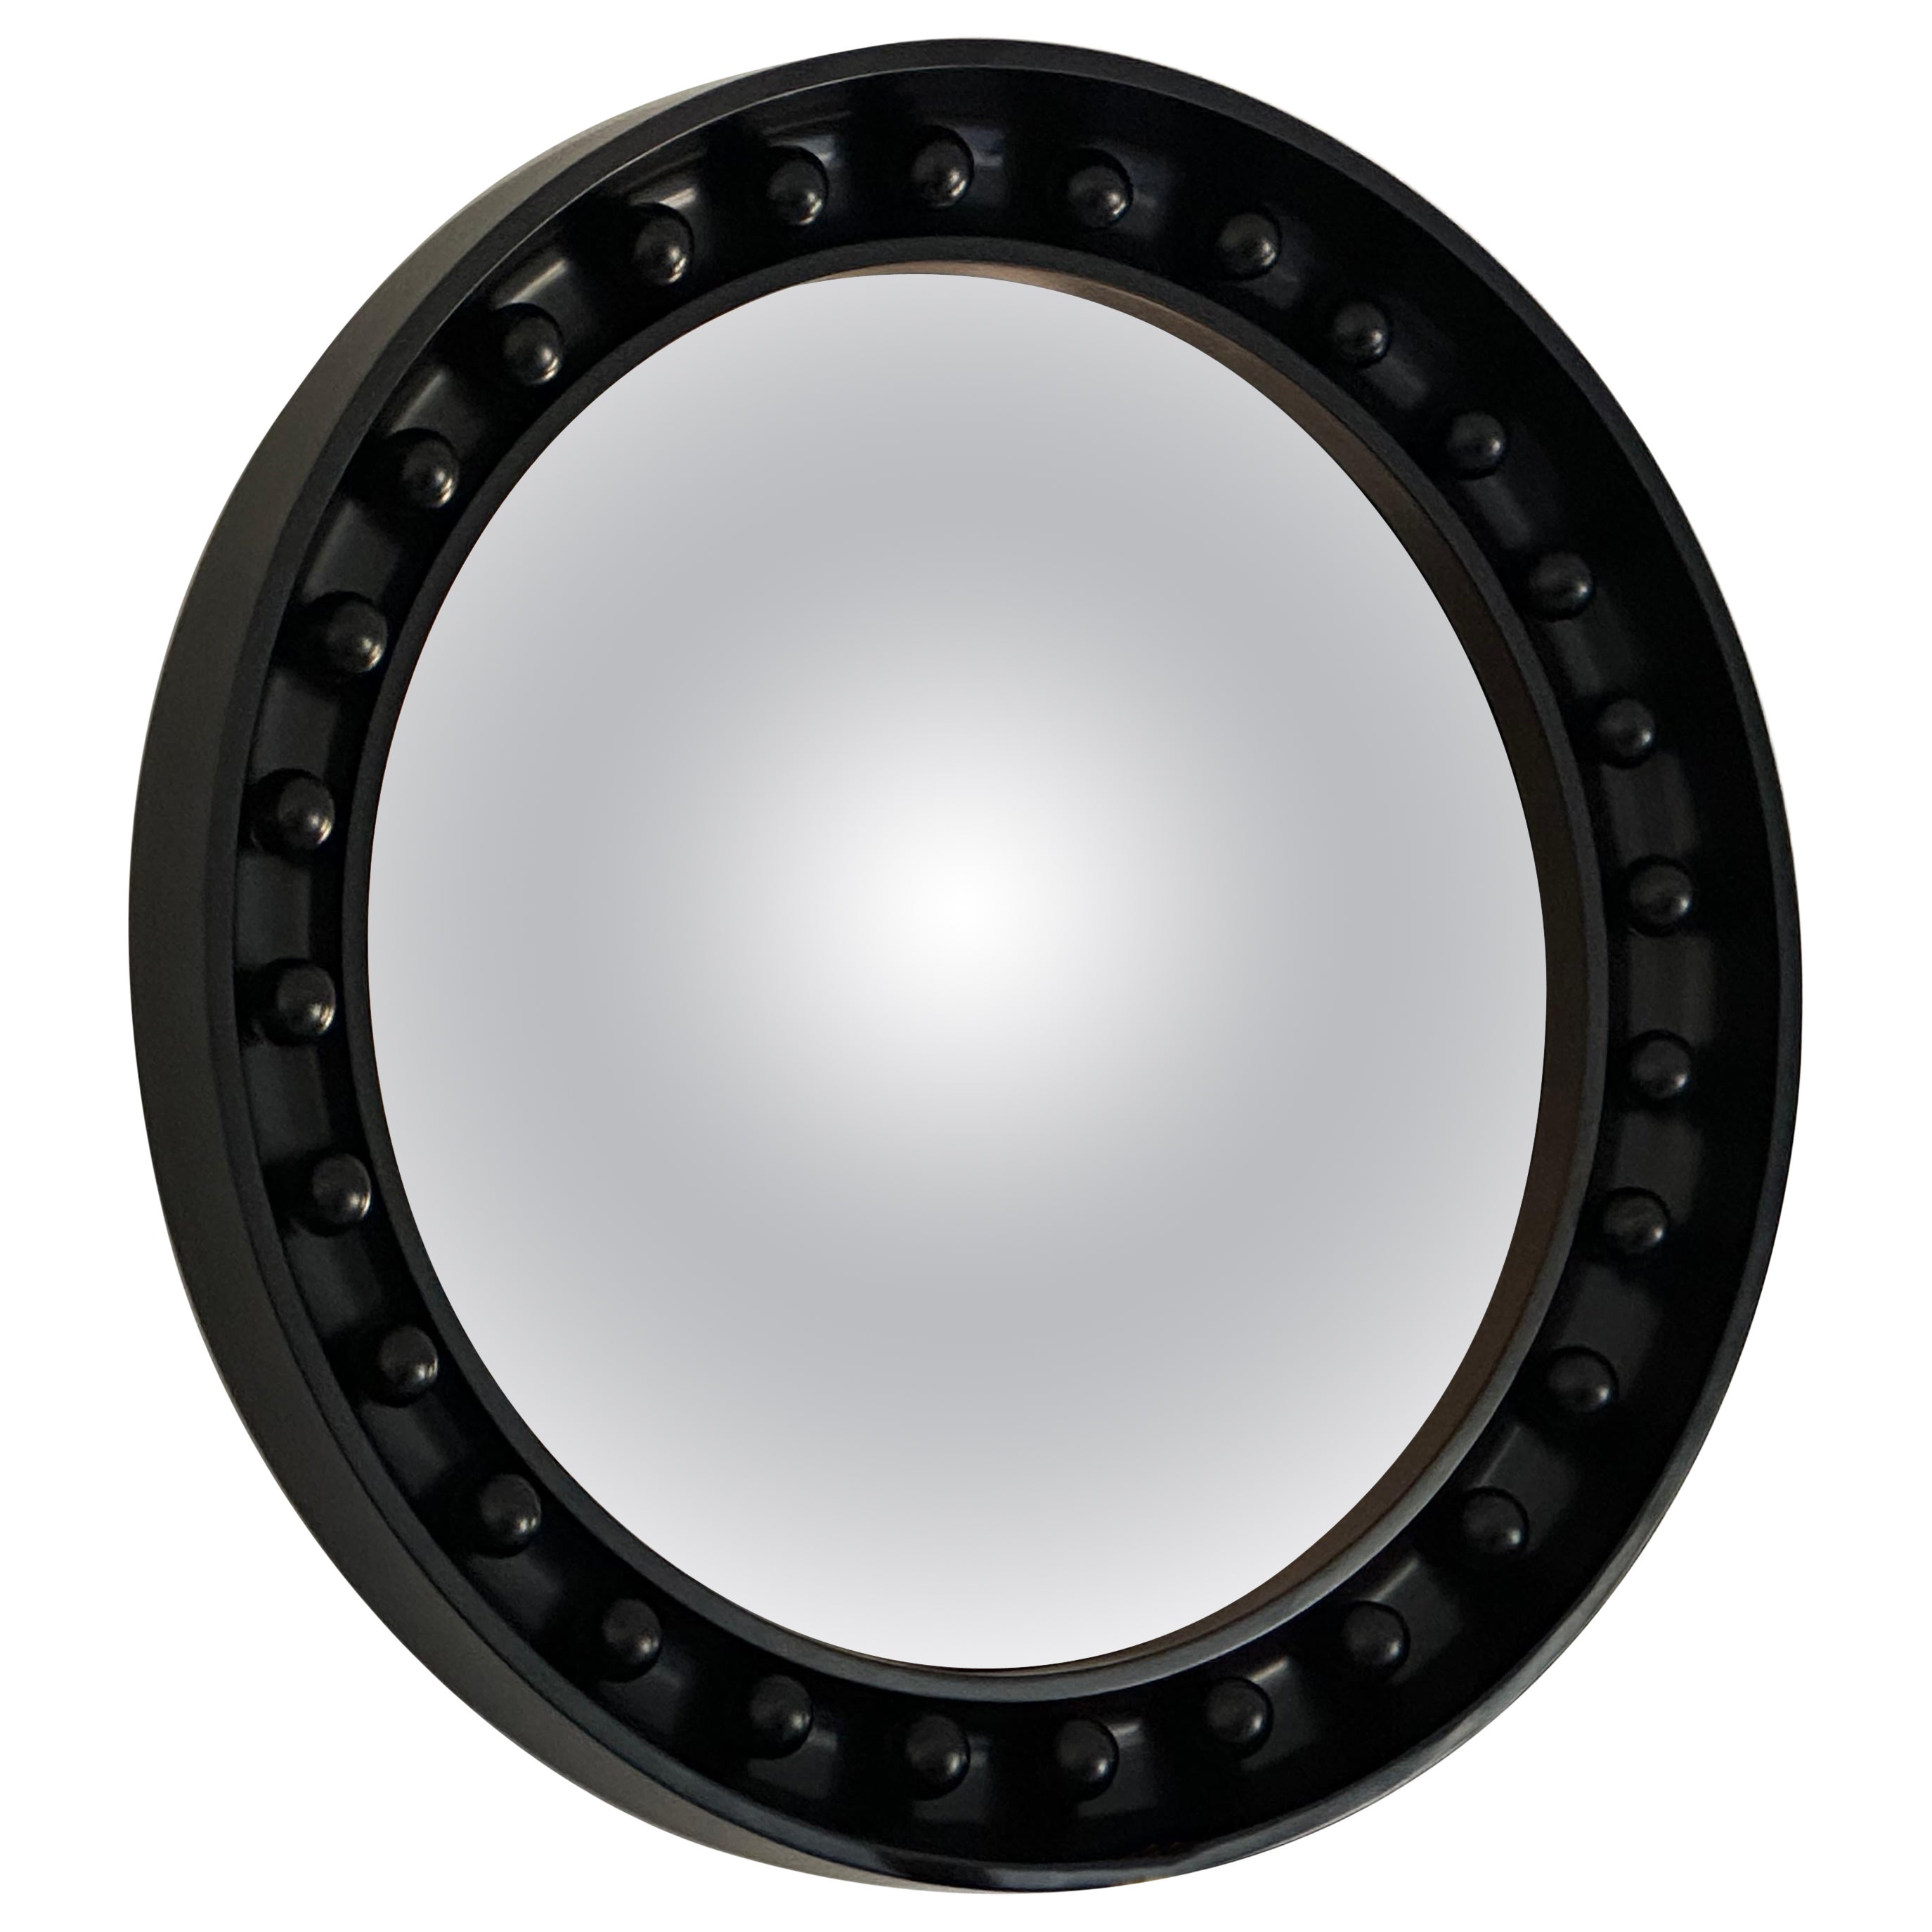 The Ravello Forte is a striking statement mirror suitable for hallways, living rooms, bedrooms and kitchens. 

The frame itself is fabricated out of hardwood by hand. The convex mirror is fabricated from low iron 6mm glass which increases it's